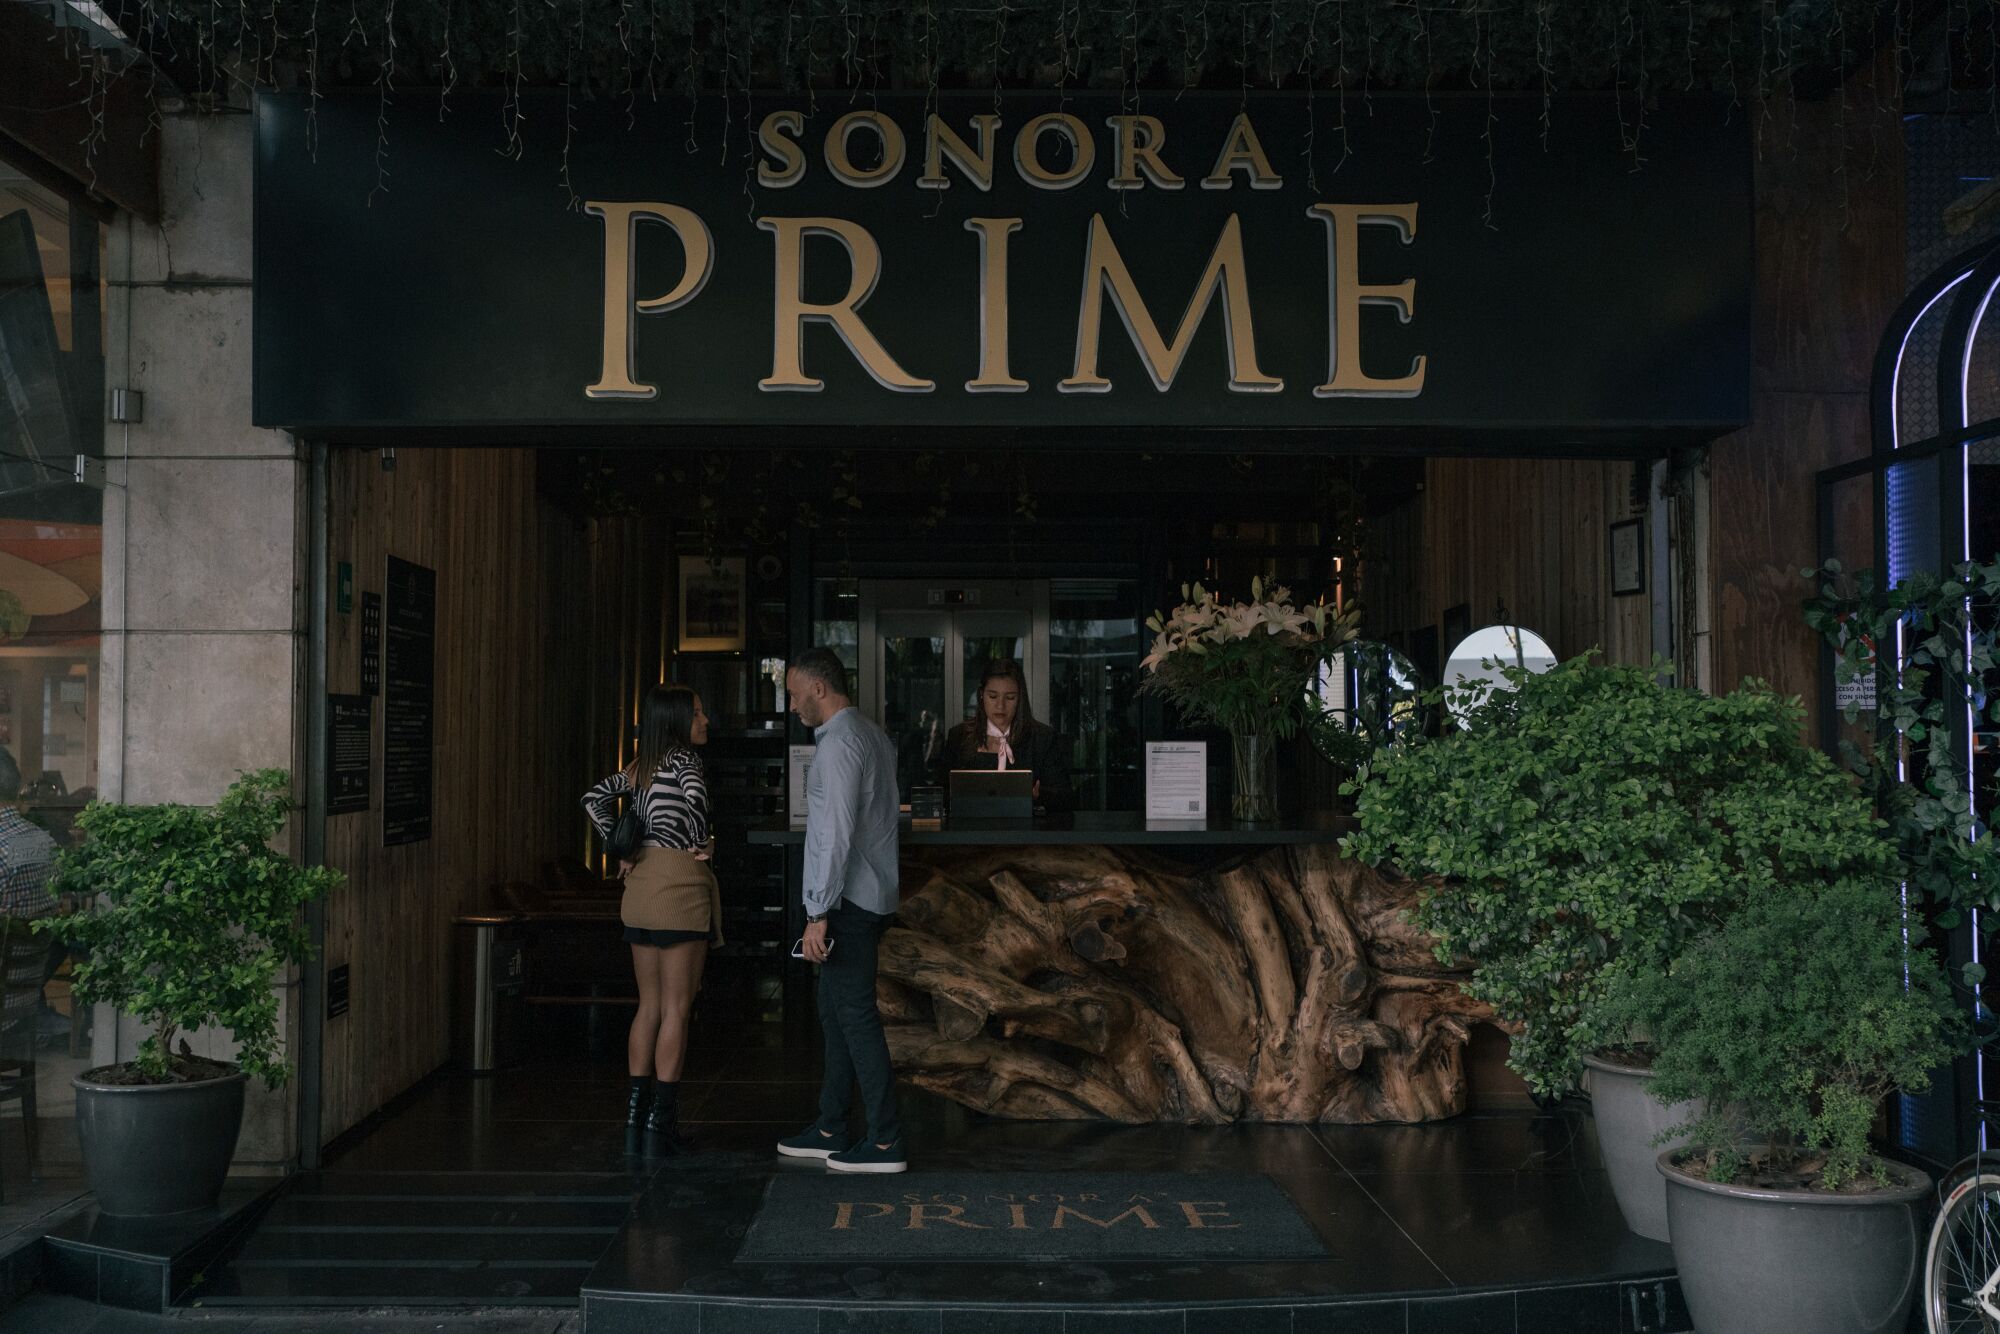 A woman, left, and a man stand in front of a reception area flanked by plants and a sign overhead that says Sonora Prime